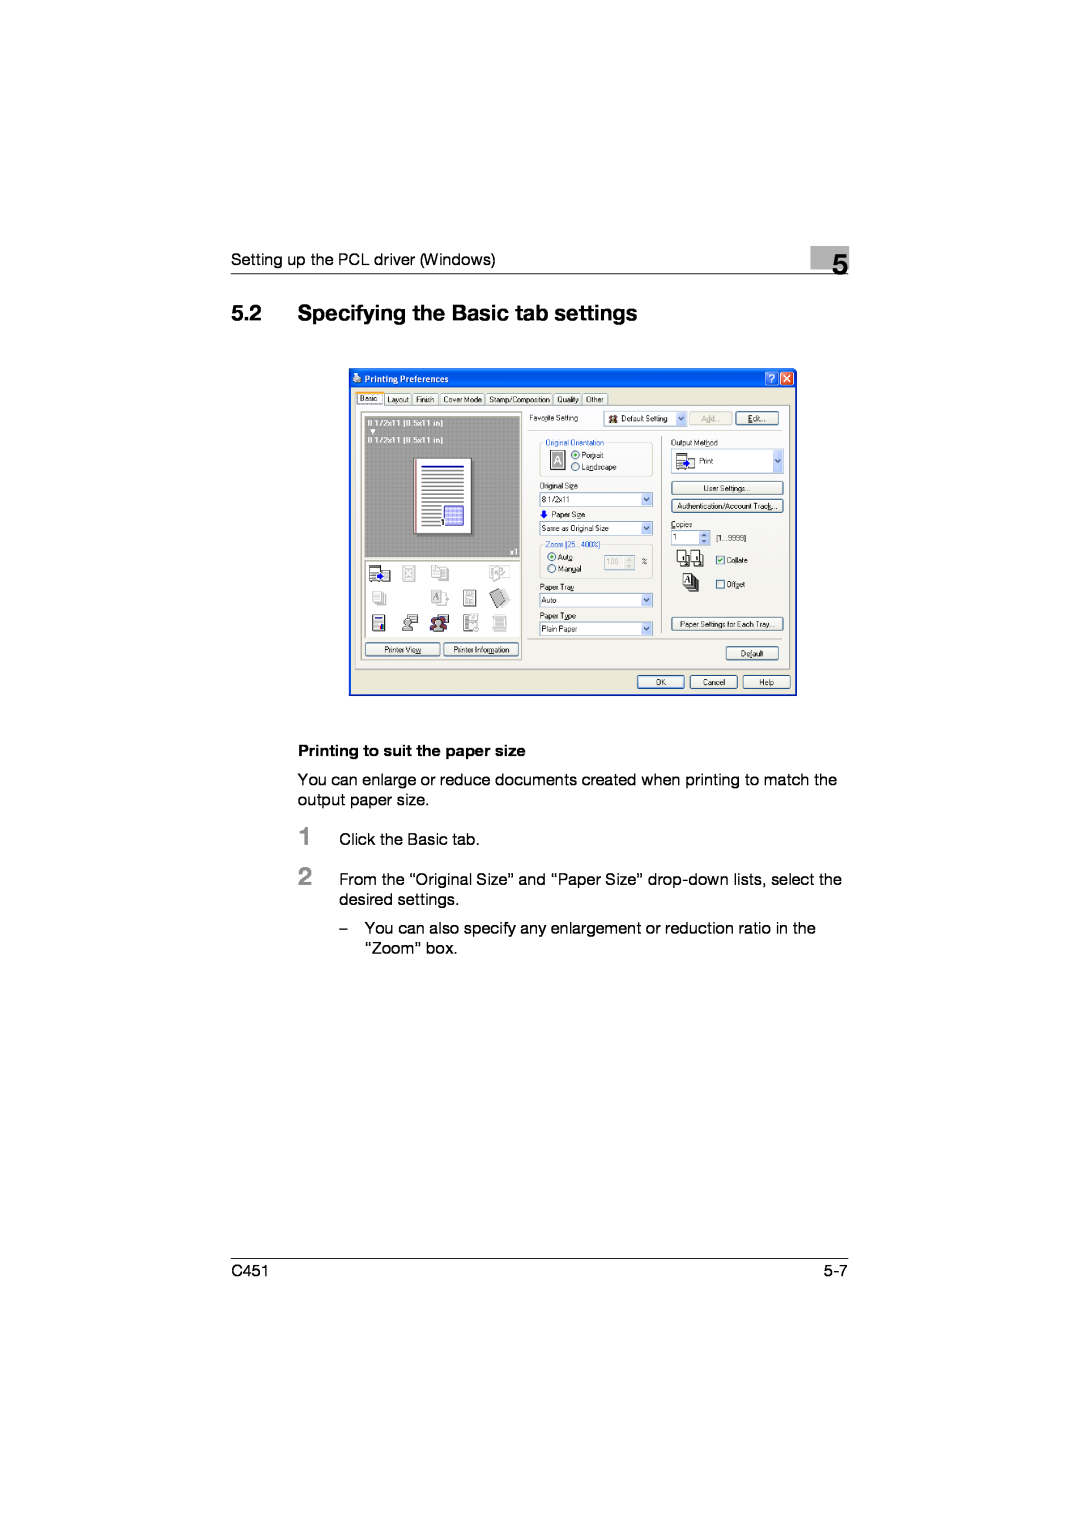 Konica Minolta C451 manual 5.2Specifying the Basic tab settings, Printing to suit the paper size 